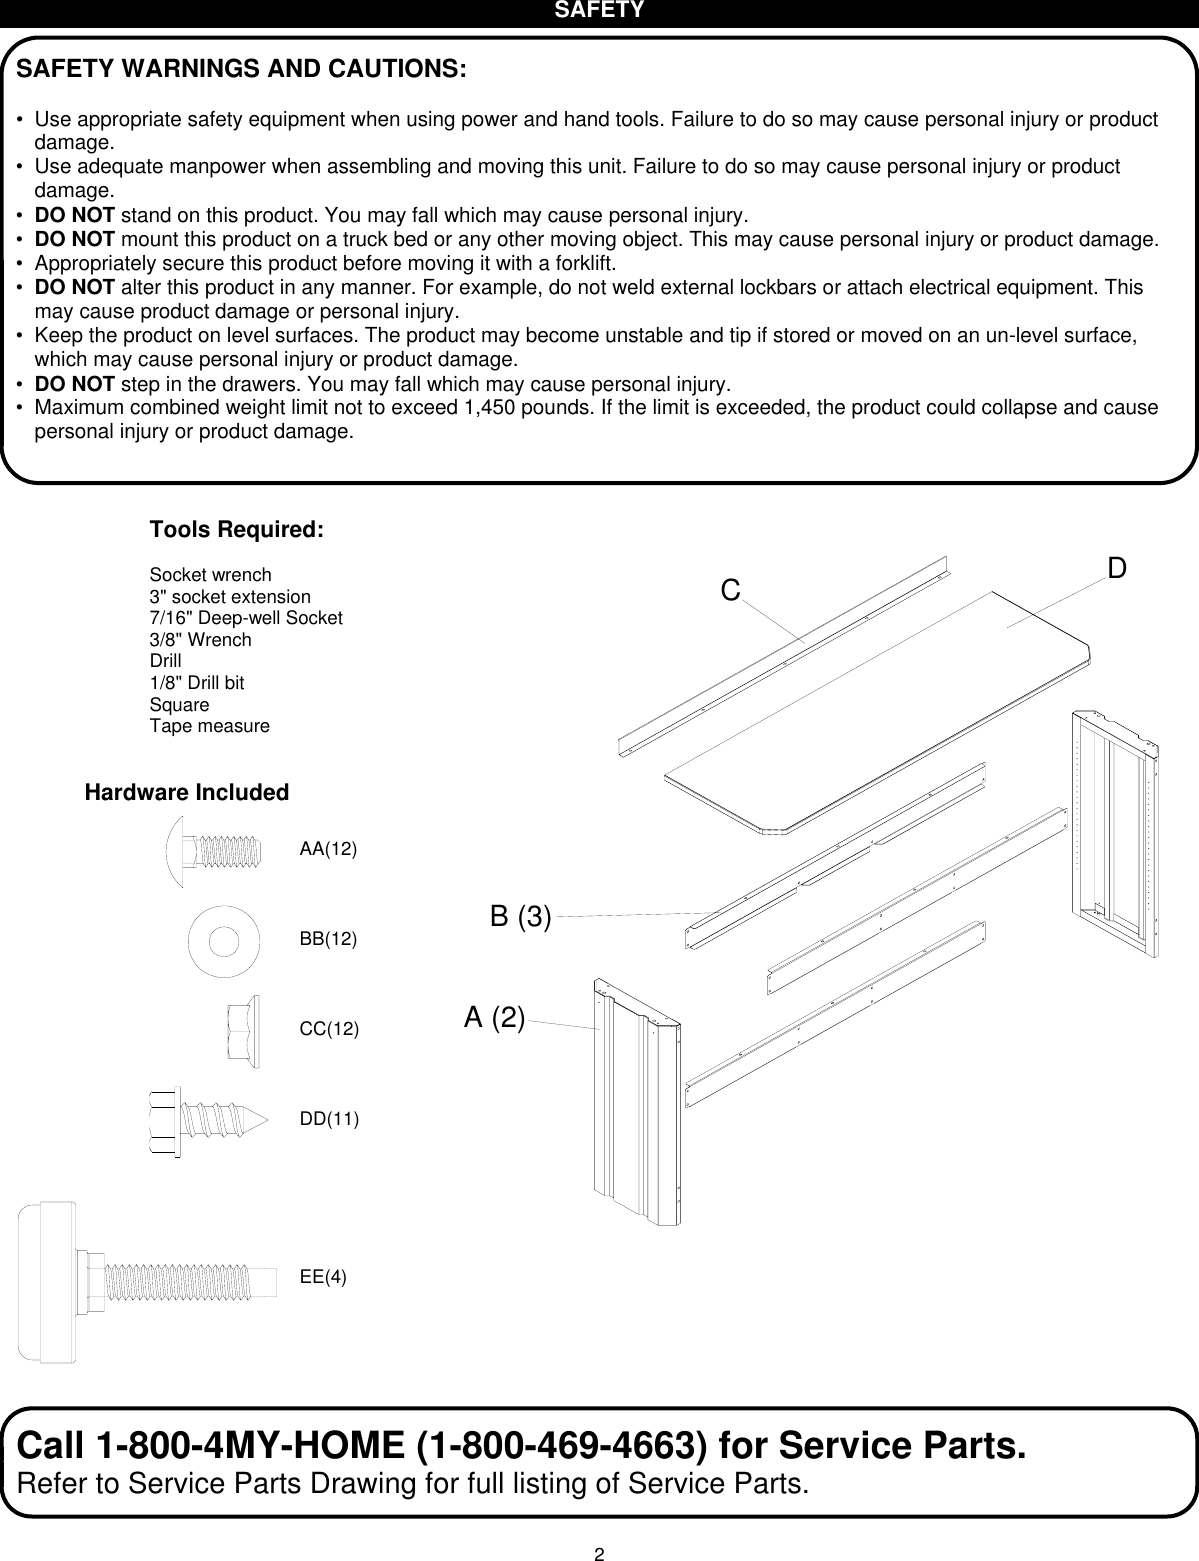 Page 2 of 8 - Craftsman Craftsman-6-Workbench-Black-Use-And-Care-Manual- H  Craftsman-6-workbench-black-use-and-care-manual